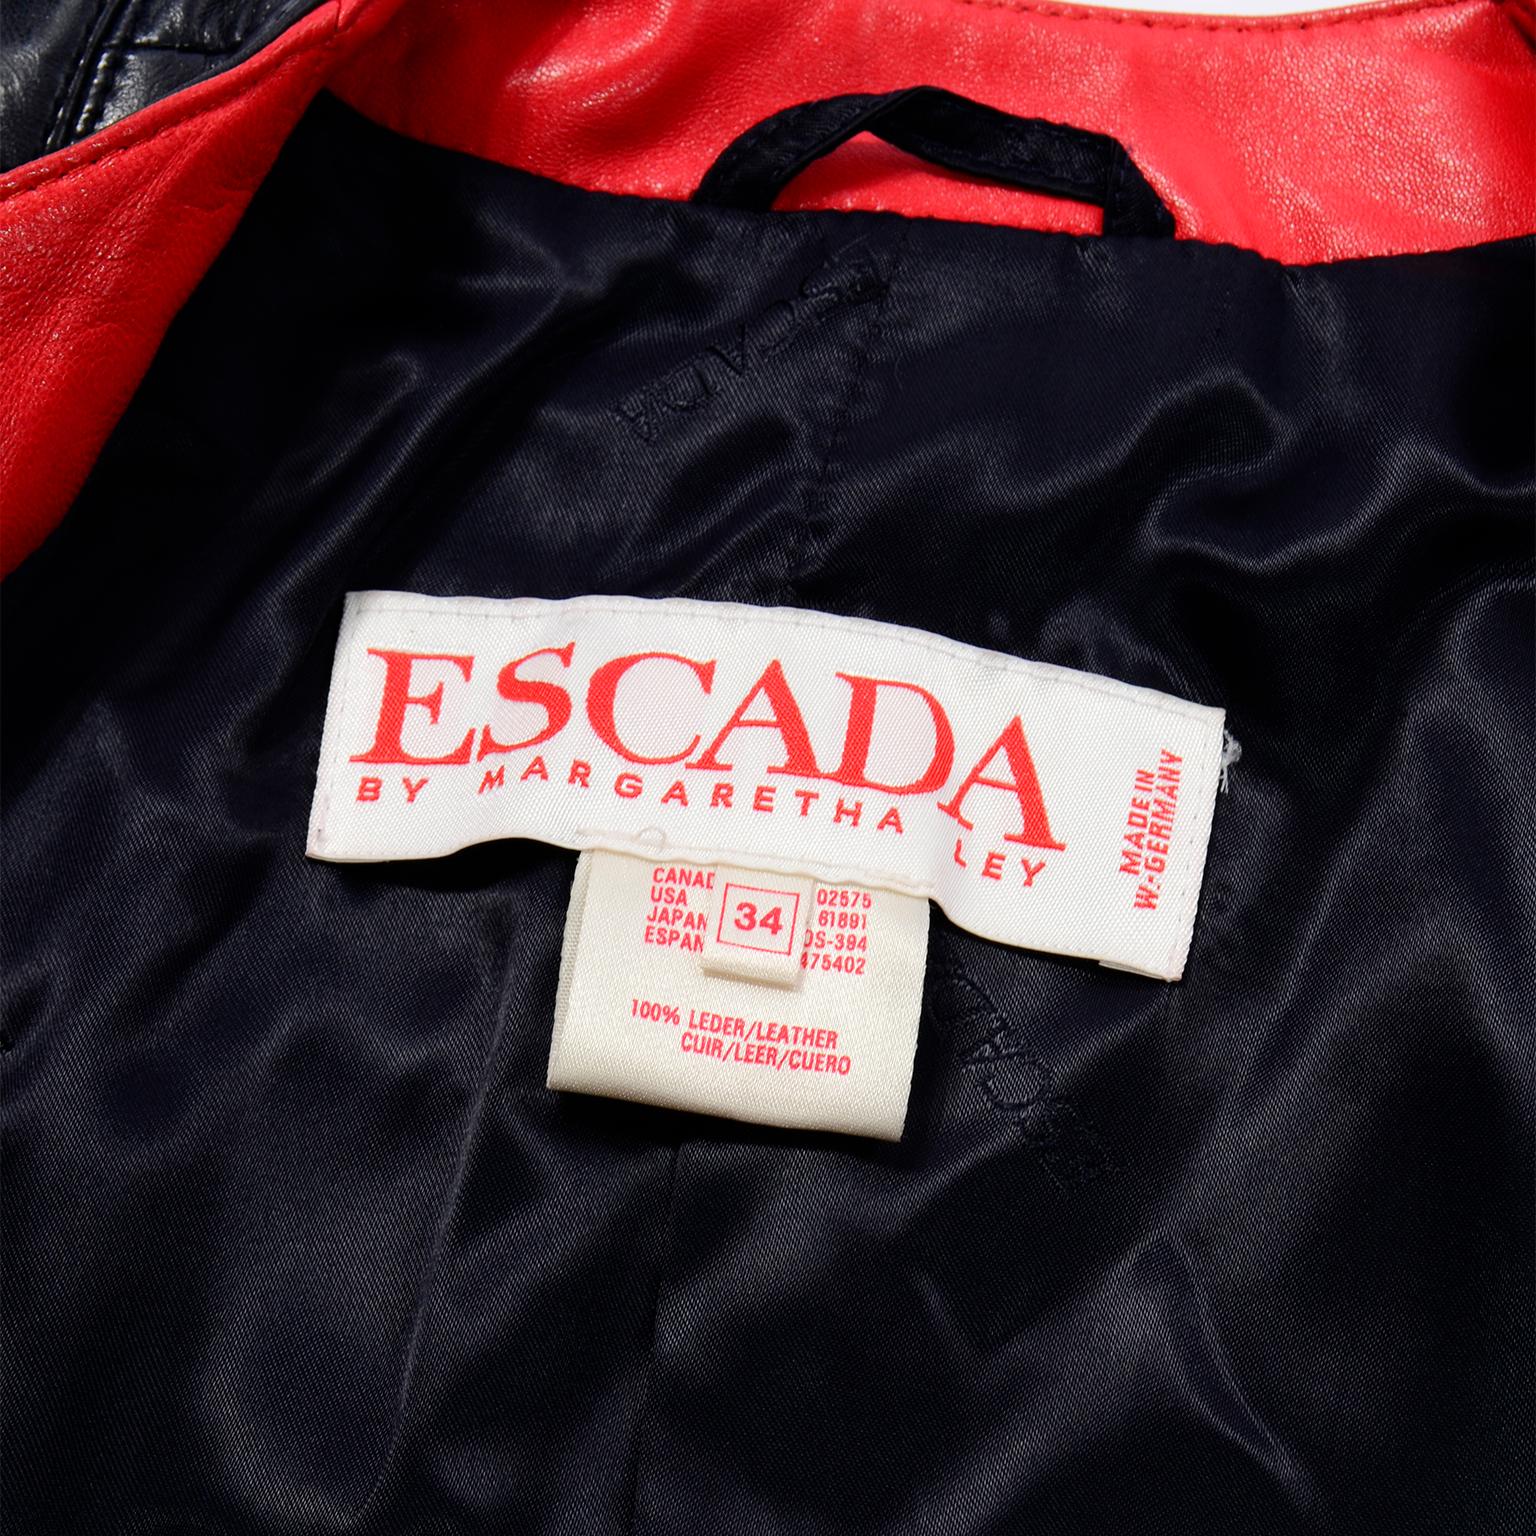 Vintage Escada Red and Black Leather Jacket With Gold Studs by Margaretha Ley 6